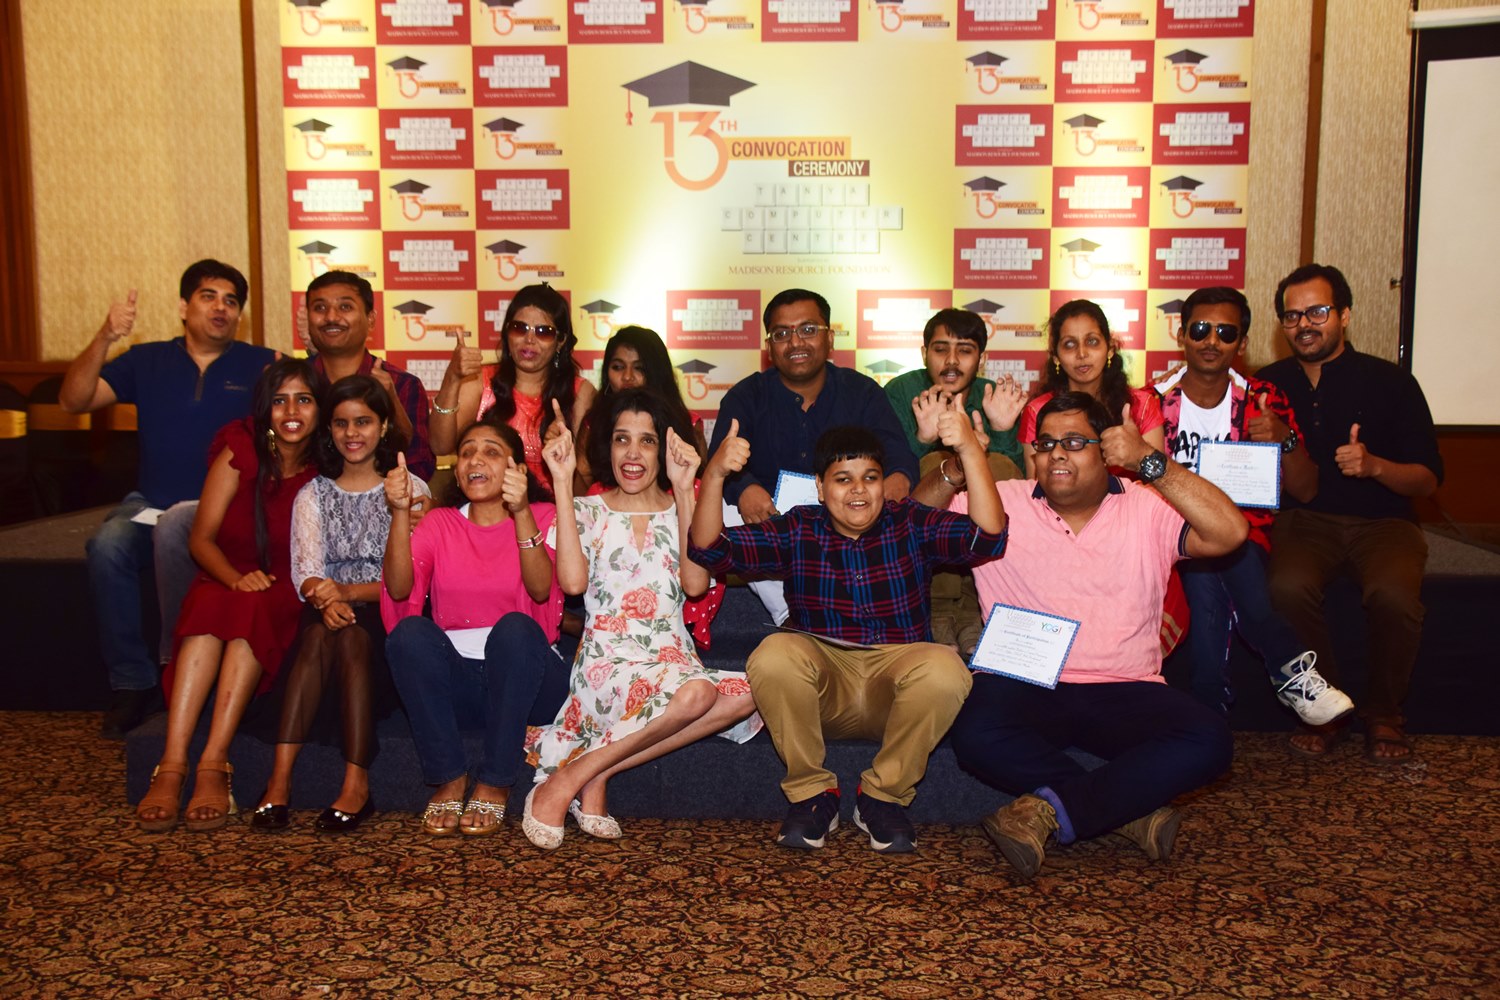 Tanya Balsara with the visually impaired students at their convocation ceremony